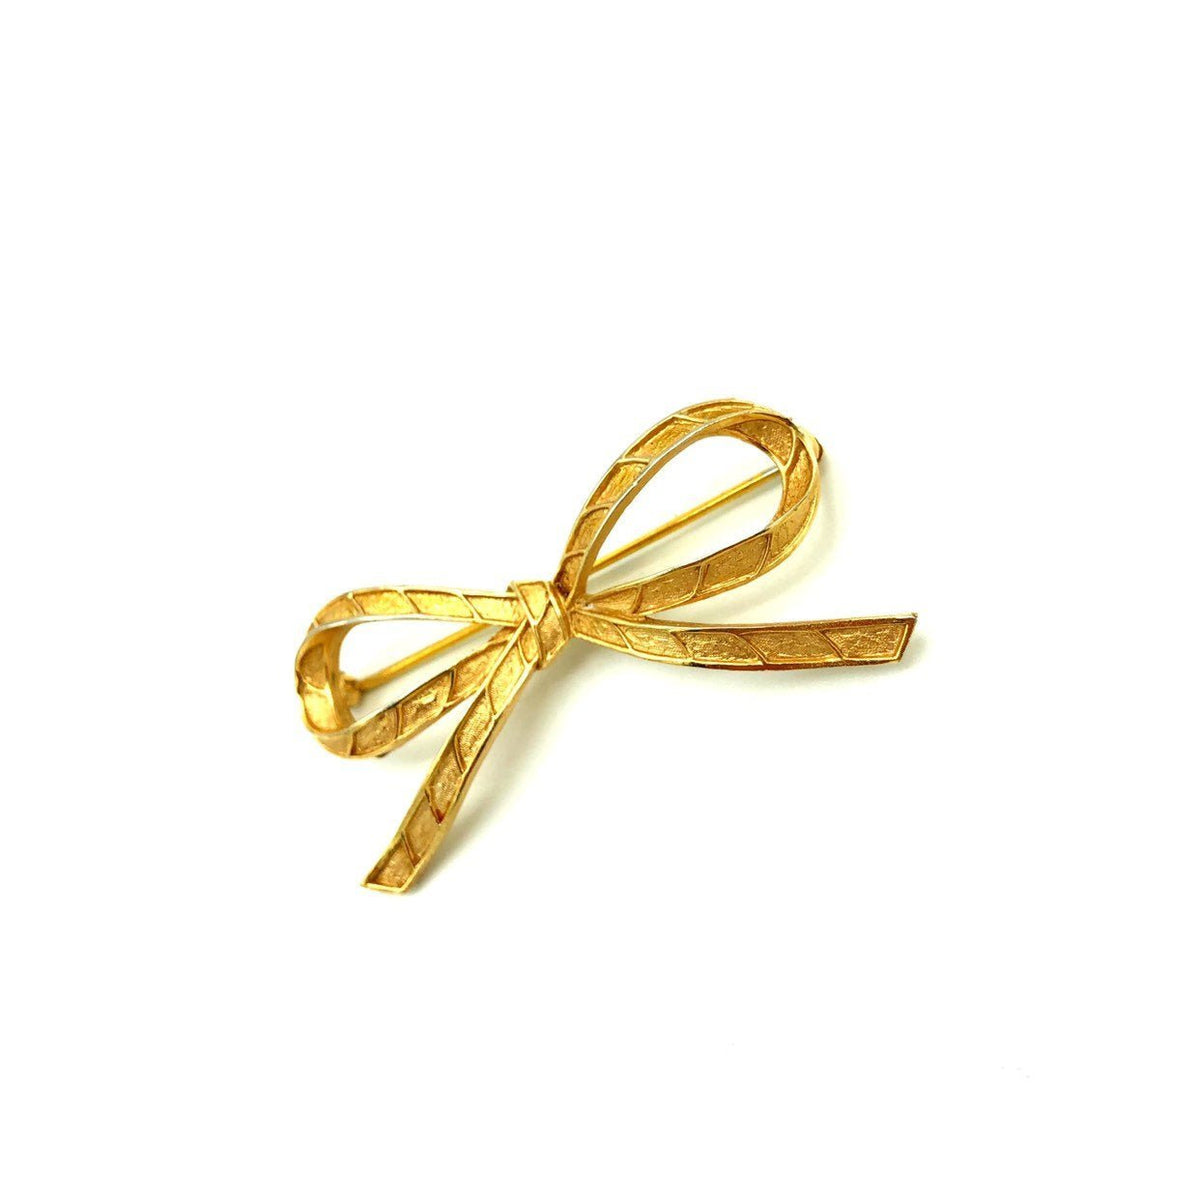 Vintage Classic Gold Trifari Bow Brooch - 24 Wishes Vintage Jewelry